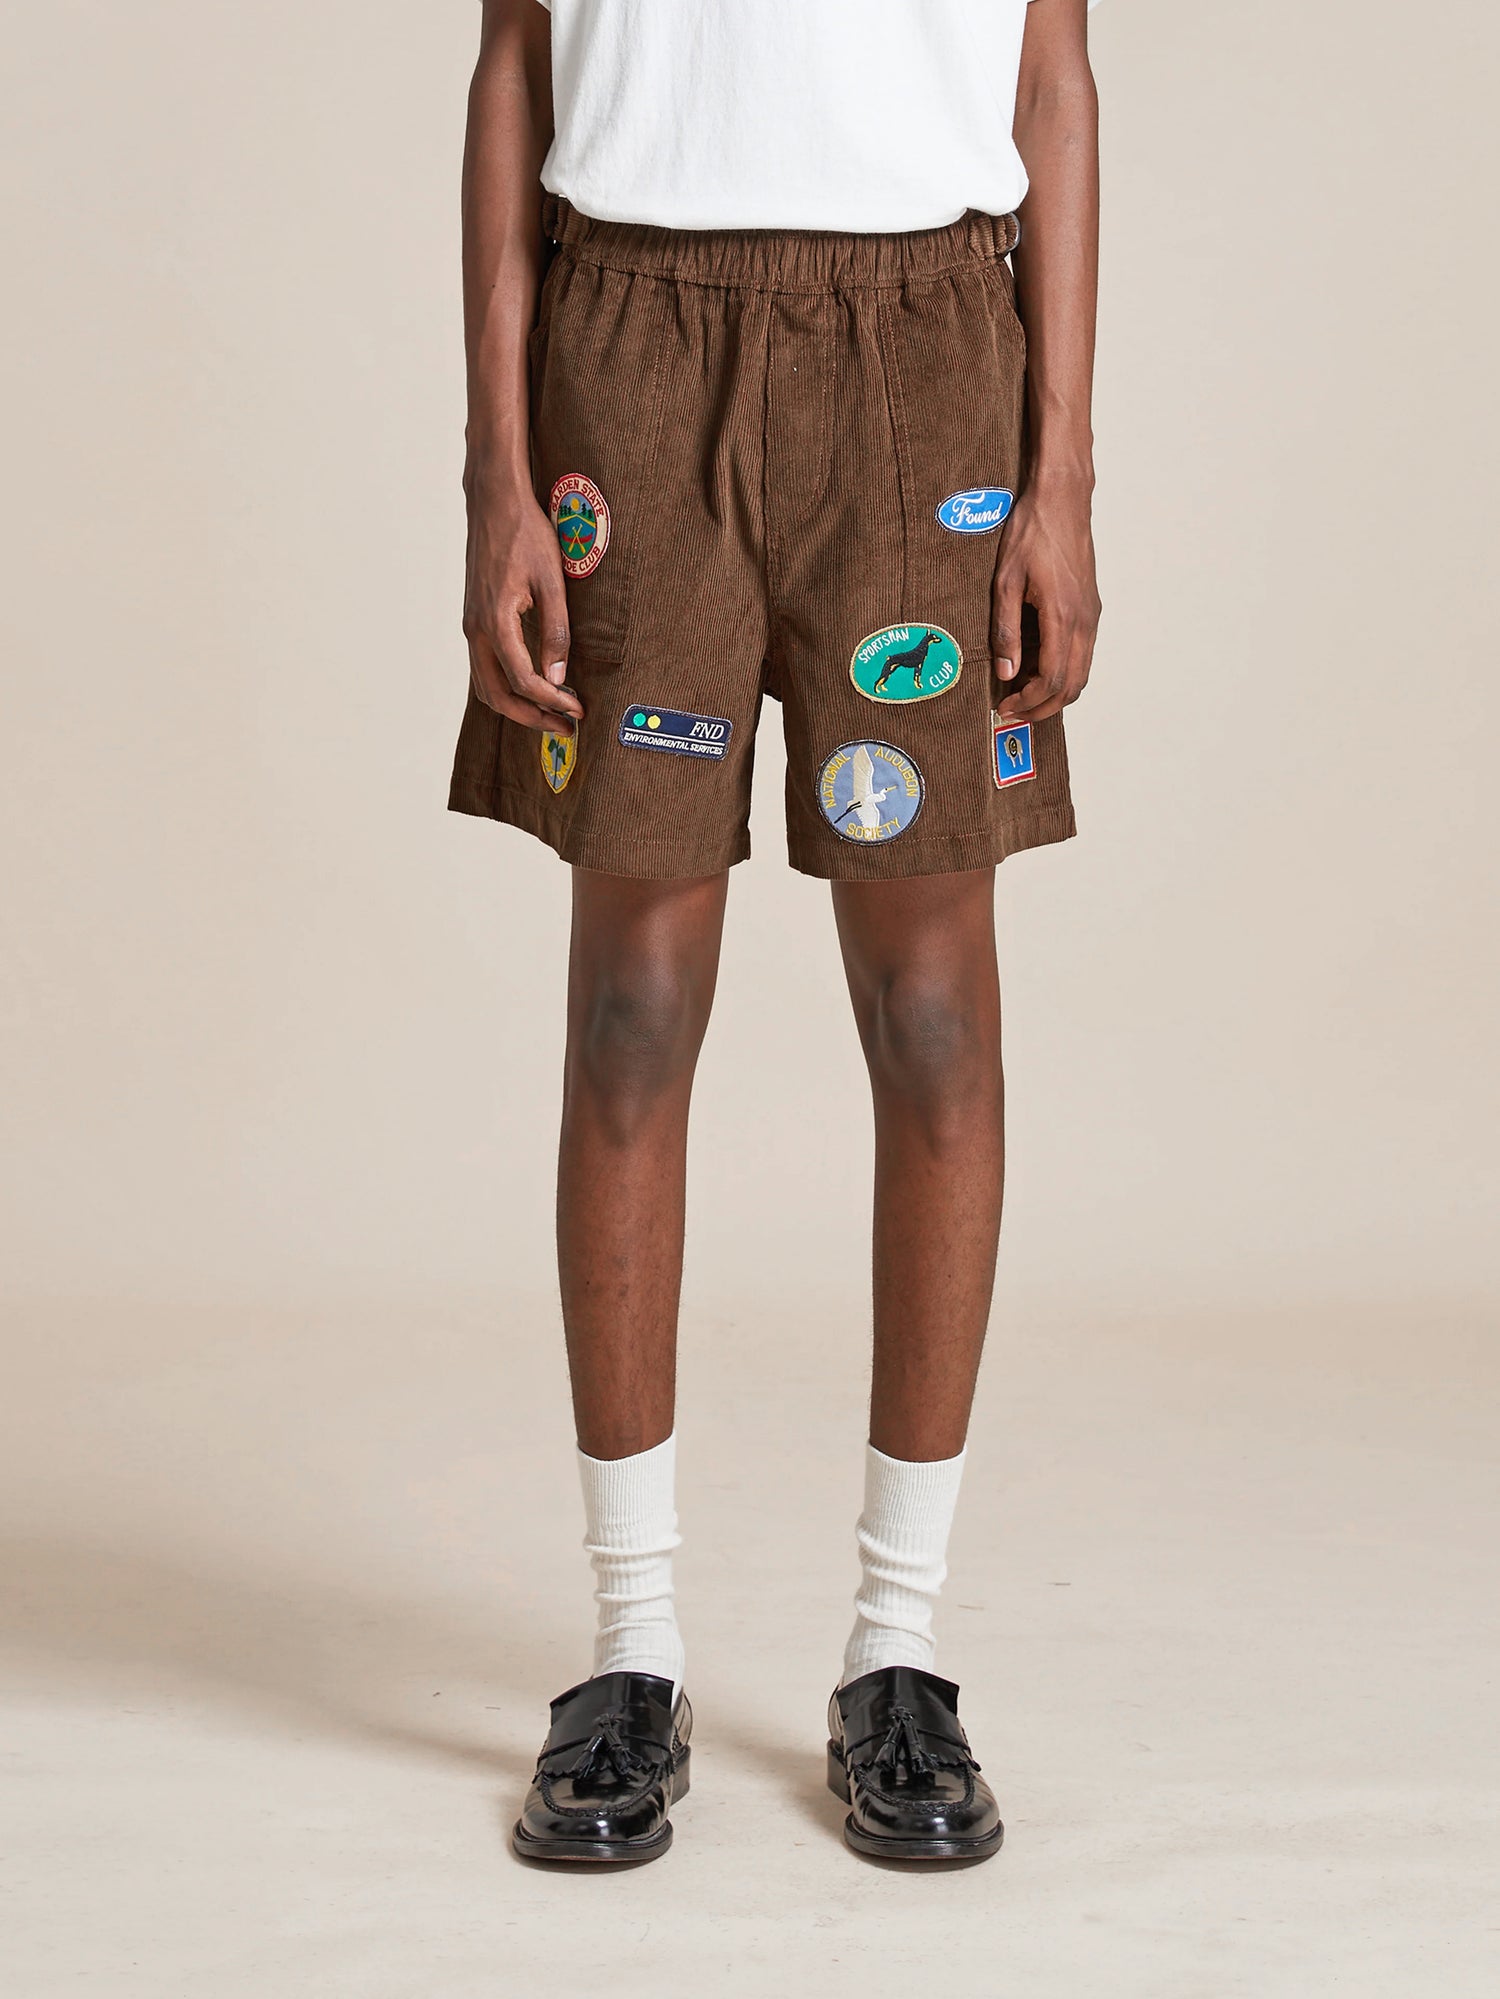 A person wearing Found Canoe Multi Patch Corduroy Shorts with colorful embroidered patches, white socks, and black shoes, standing against a neutral background. Only the lower half of the body is visible.